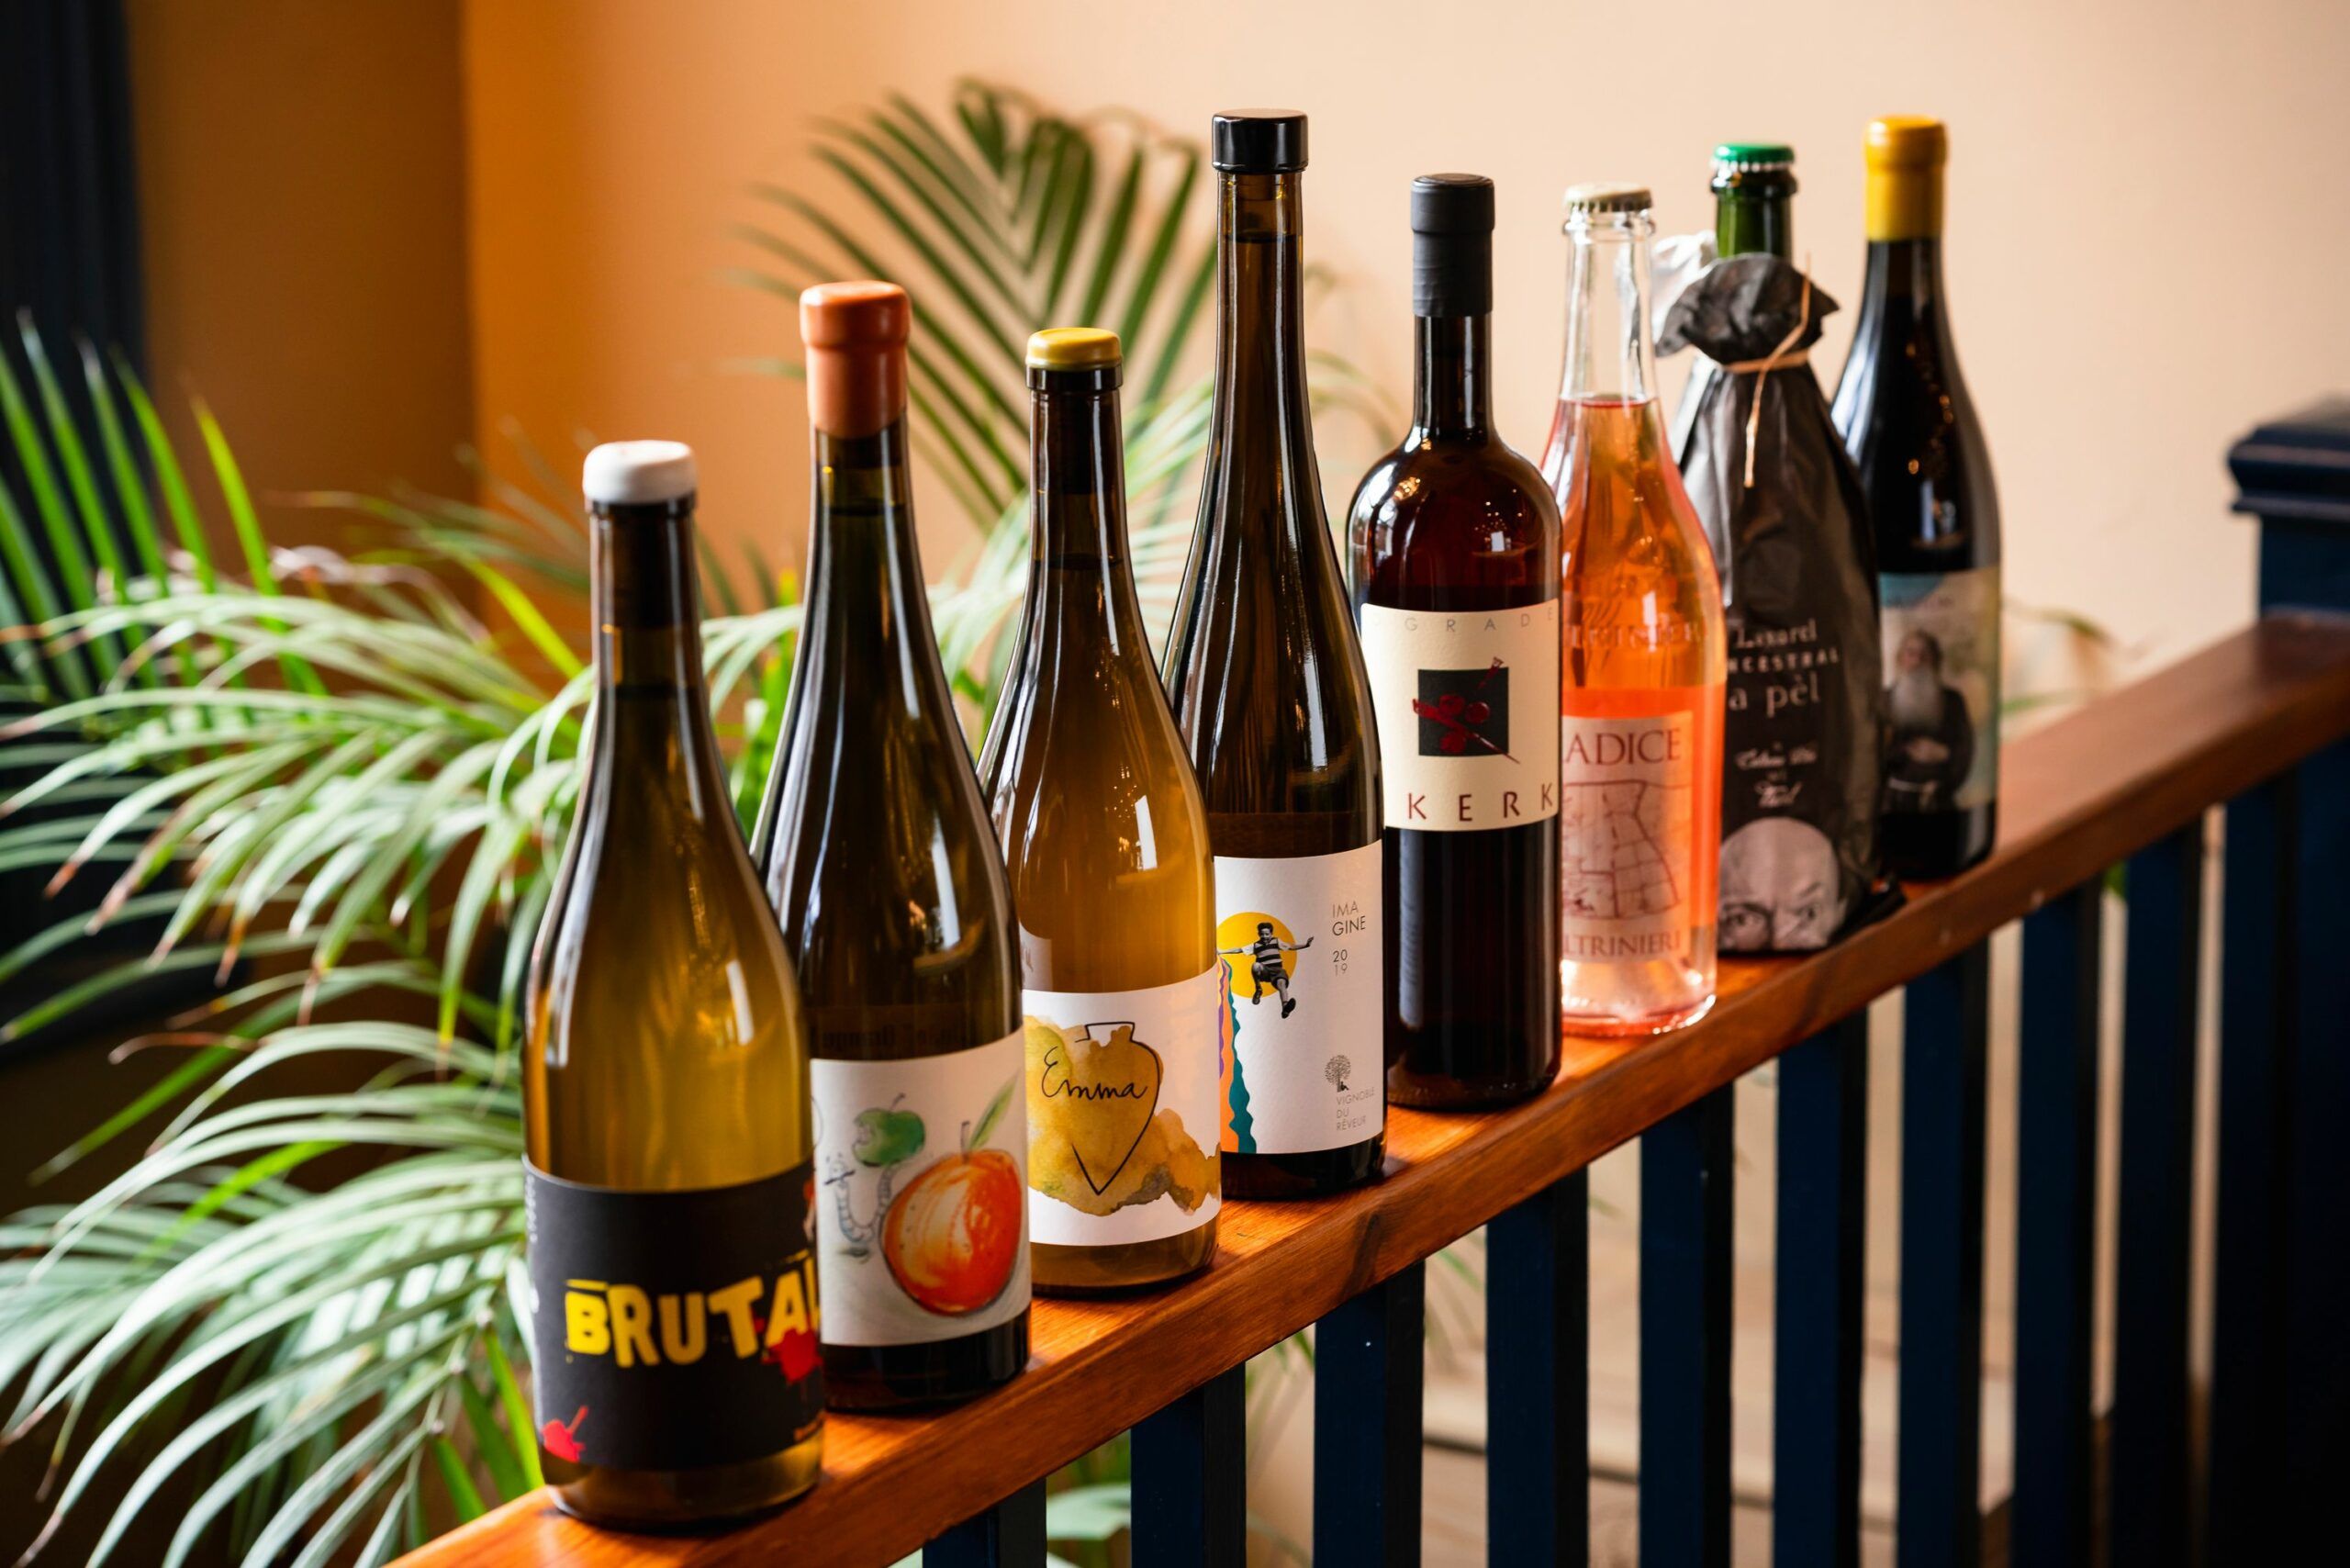 eight different wines next to each other on the wooden banister